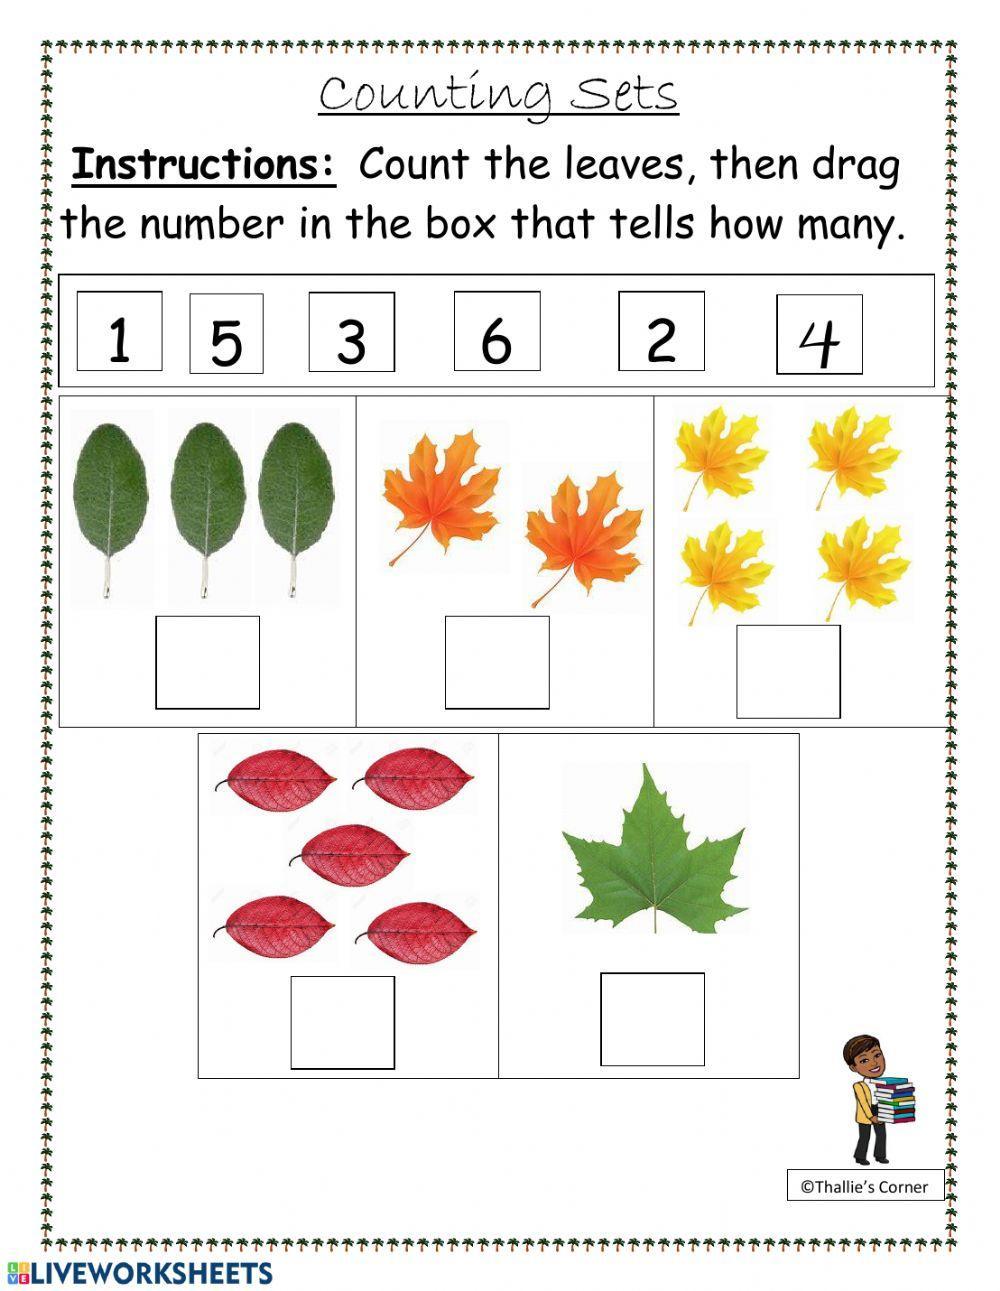 Counting Sets 1-5